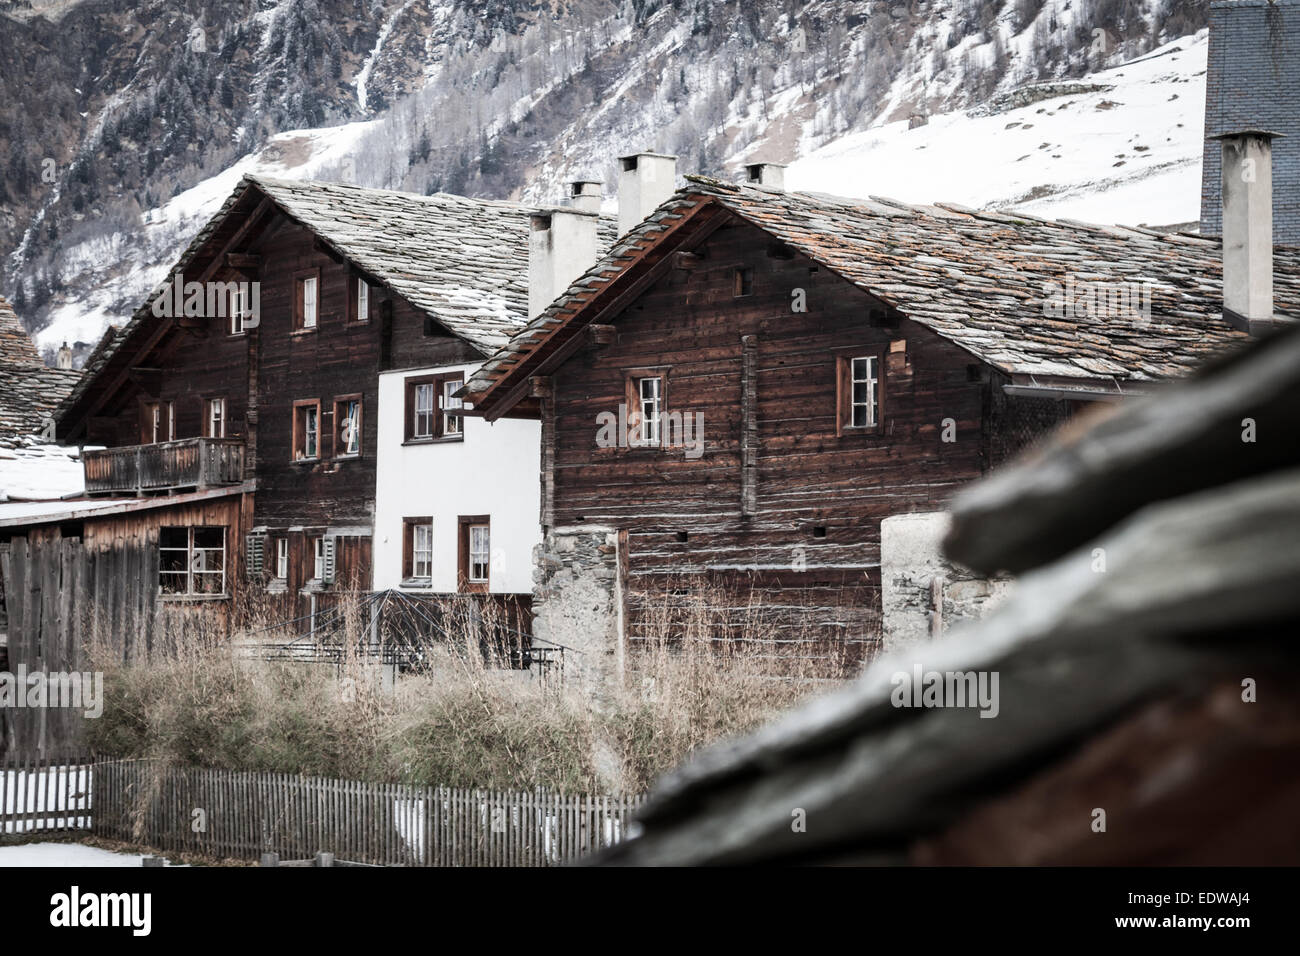 Traditional wooden houses in vals, switzerland Stock Photo